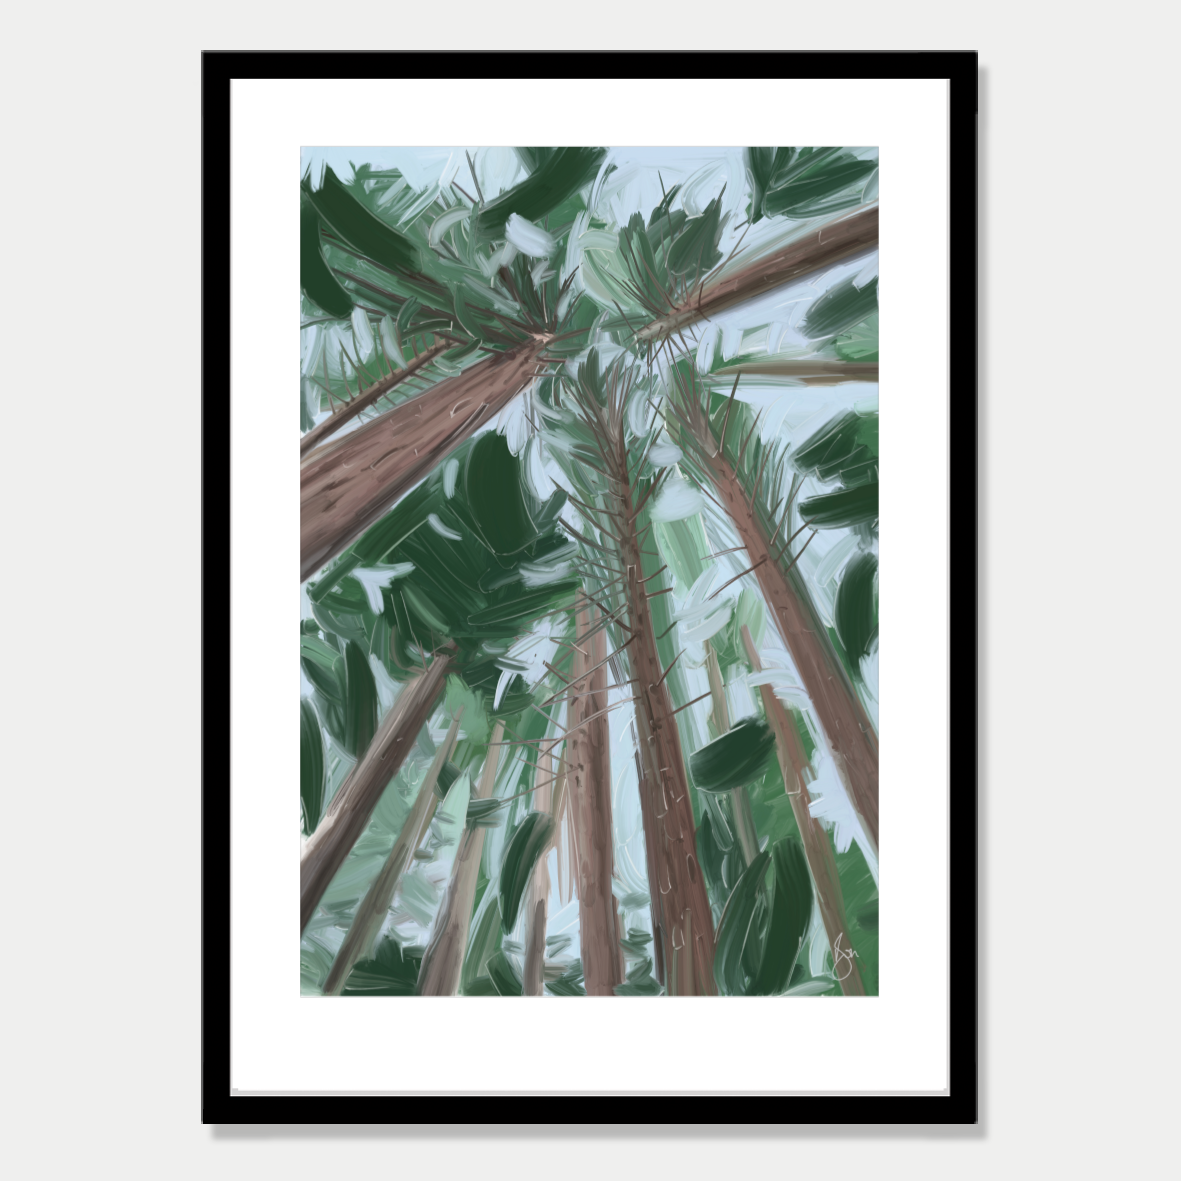 This art print is a still life of a forest scene in New Zealand, by Bon Jung. Printed in New Zealand by endemicworld and framed in black.